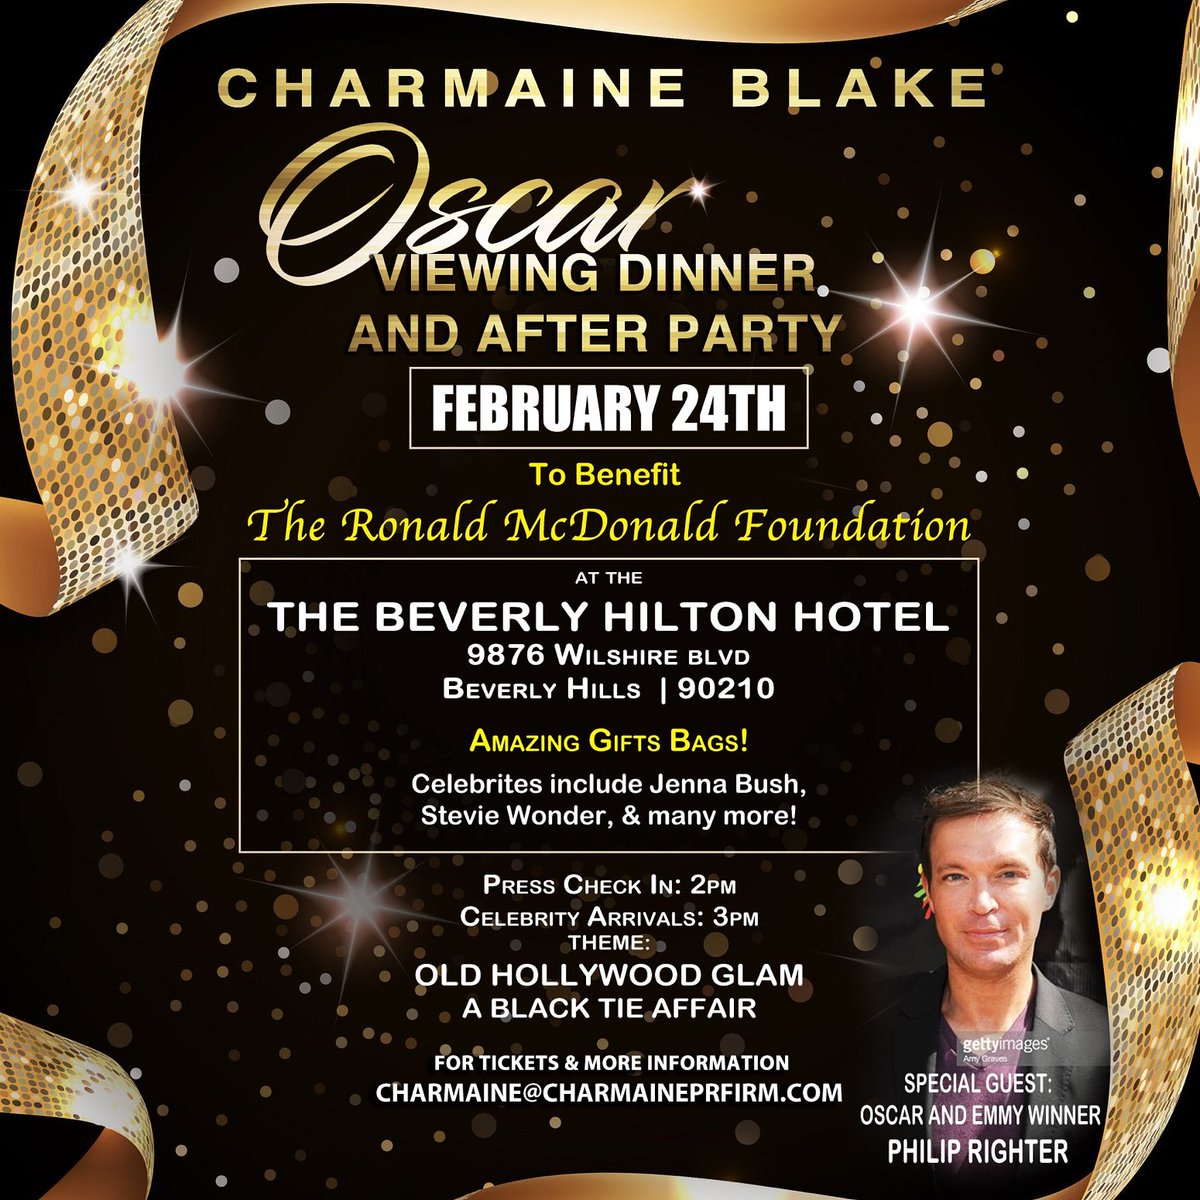 #charmaineblake  and #HollywoodStarGala #oscarViewing #dinner & #Afterparty #amazingGiftbags #thebestevent  #TheBeverlyHiltonHotel #Today